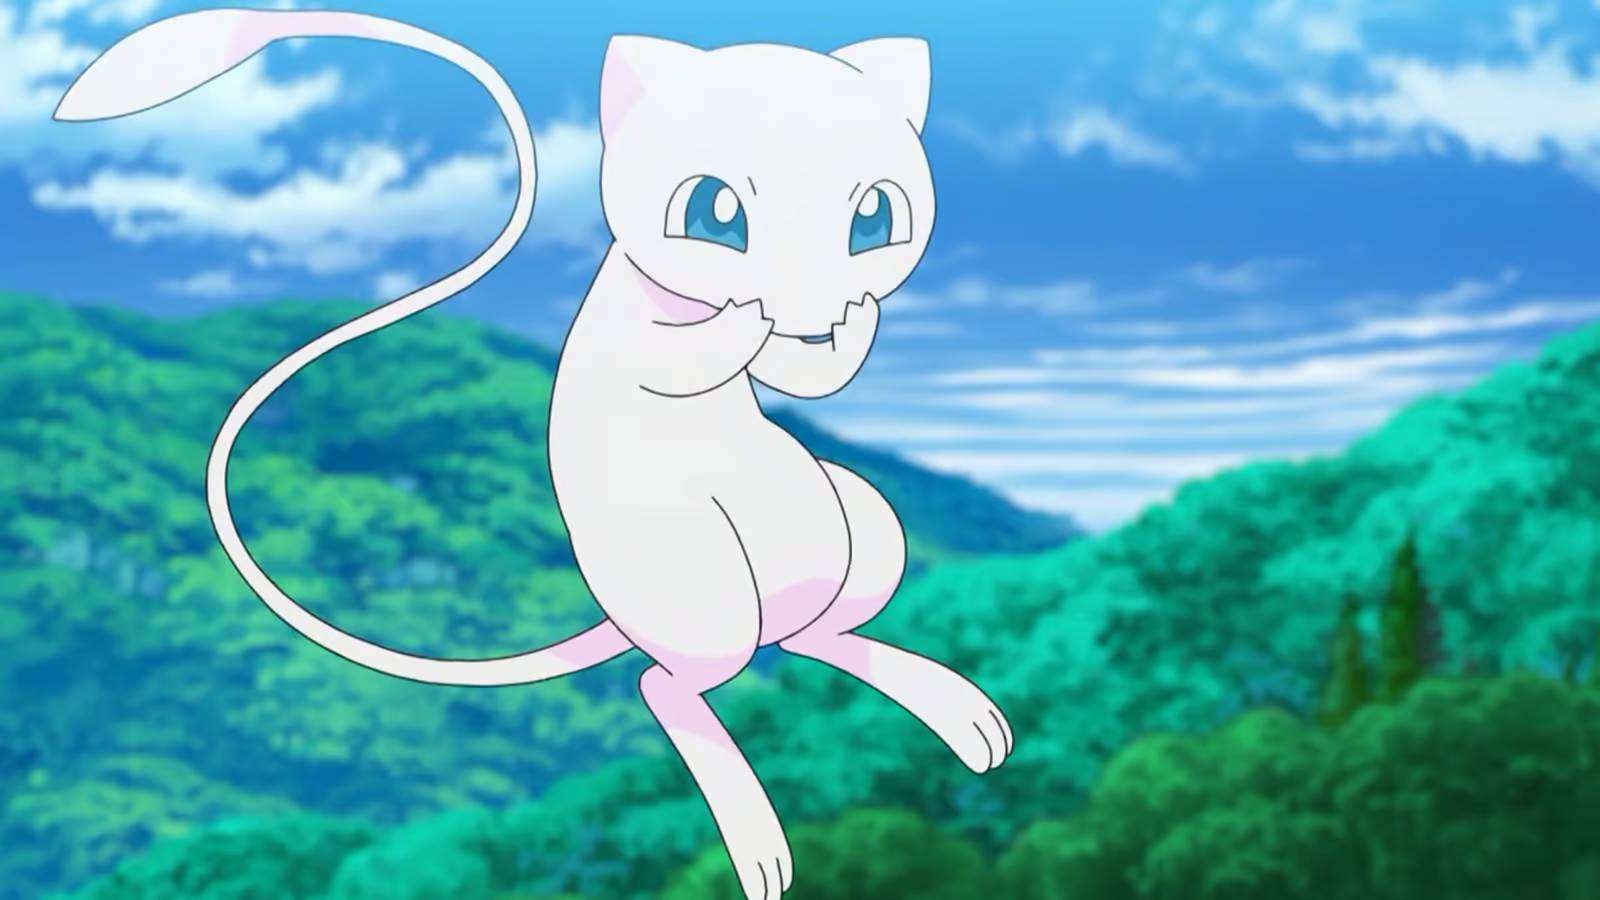 A still from the Pokemon anime shows the Pokemon Mew floating in the air